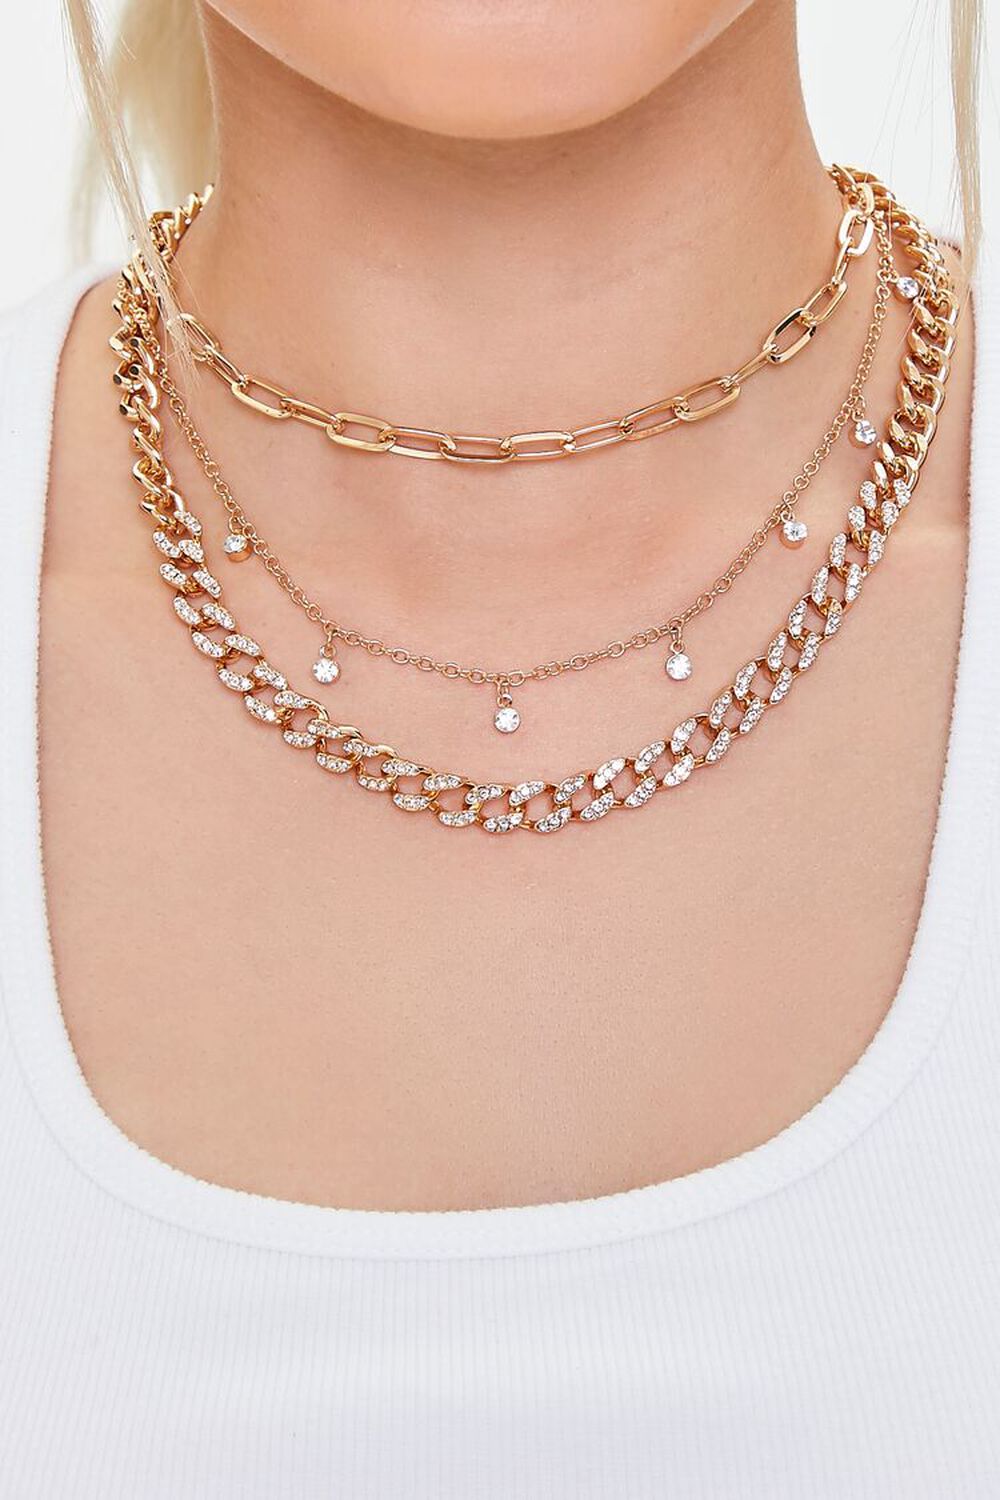 GOLD/CLEAR Rhinestone Layered Chain Necklace, image 1